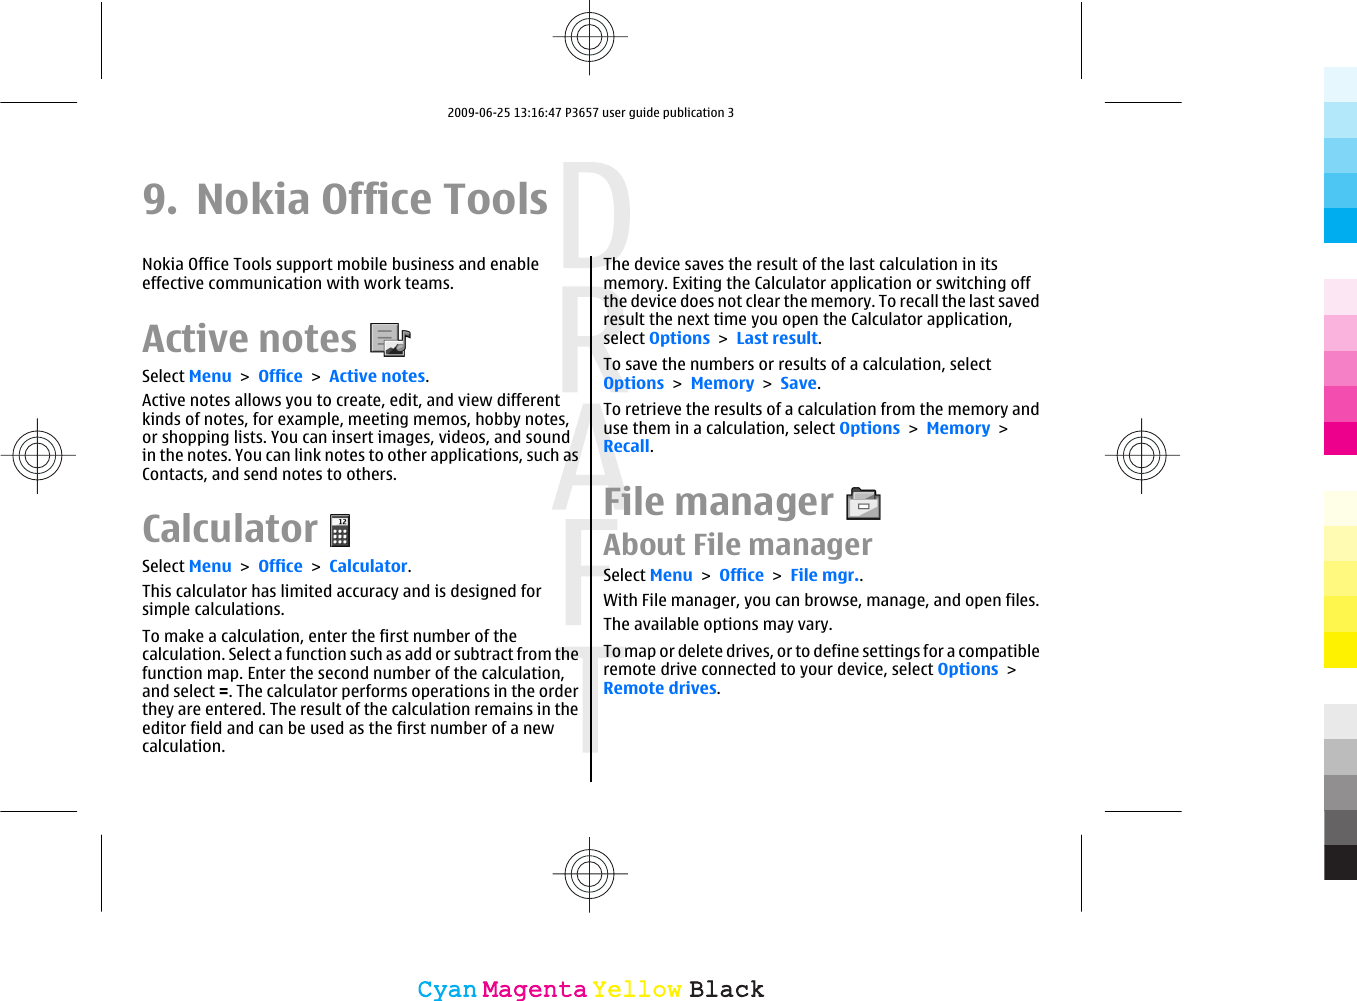 9. Nokia Office ToolsNokia Office Tools support mobile business and enableeffective communication with work teams.Active notesSelect Menu &gt; Office &gt; Active notes.Active notes allows you to create, edit, and view differentkinds of notes, for example, meeting memos, hobby notes,or shopping lists. You can insert images, videos, and soundin the notes. You can link notes to other applications, such asContacts, and send notes to others.CalculatorSelect Menu &gt; Office &gt; Calculator.This calculator has limited accuracy and is designed forsimple calculations.To make a calculation, enter the first number of thecalculation. Select a function such as add or subtract from thefunction map. Enter the second number of the calculation,and select =. The calculator performs operations in the orderthey are entered. The result of the calculation remains in theeditor field and can be used as the first number of a newcalculation.The device saves the result of the last calculation in itsmemory. Exiting the Calculator application or switching offthe device does not clear the memory. To recall the last savedresult the next time you open the Calculator application,select Options &gt; Last result.To save the numbers or results of a calculation, selectOptions &gt; Memory &gt; Save.To retrieve the results of a calculation from the memory anduse them in a calculation, select Options &gt; Memory &gt;Recall.File managerAbout File managerSelect Menu &gt; Office &gt; File mgr..With File manager, you can browse, manage, and open files.The available options may vary.To map or delete drives, or to define settings for a compatibleremote drive connected to your device, select Options &gt;Remote drives.CyanCyanMagentaMagentaYellowYellowBlackBlack2009-06-25 13:16:47 P3657 user guide publication 3